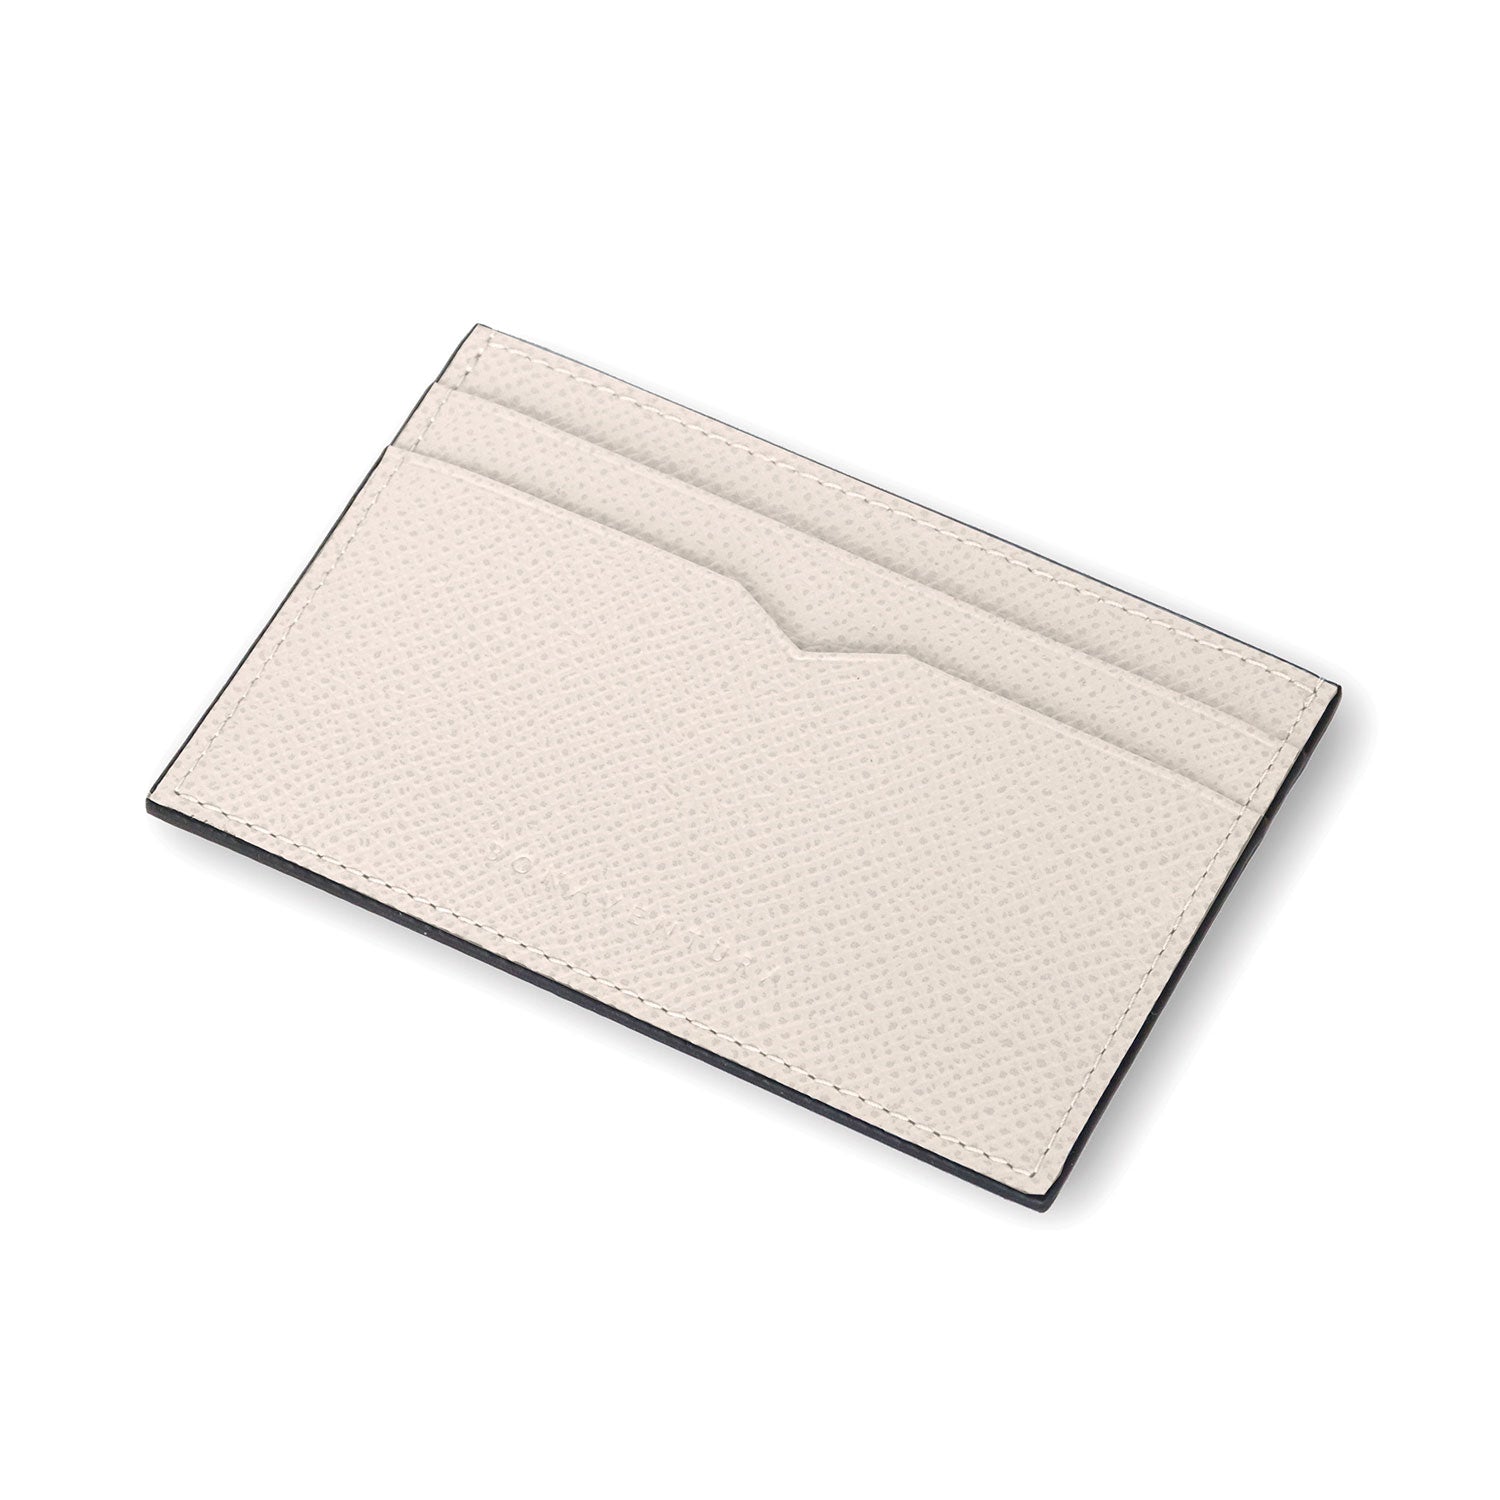 Slim card case in Noblesse leather